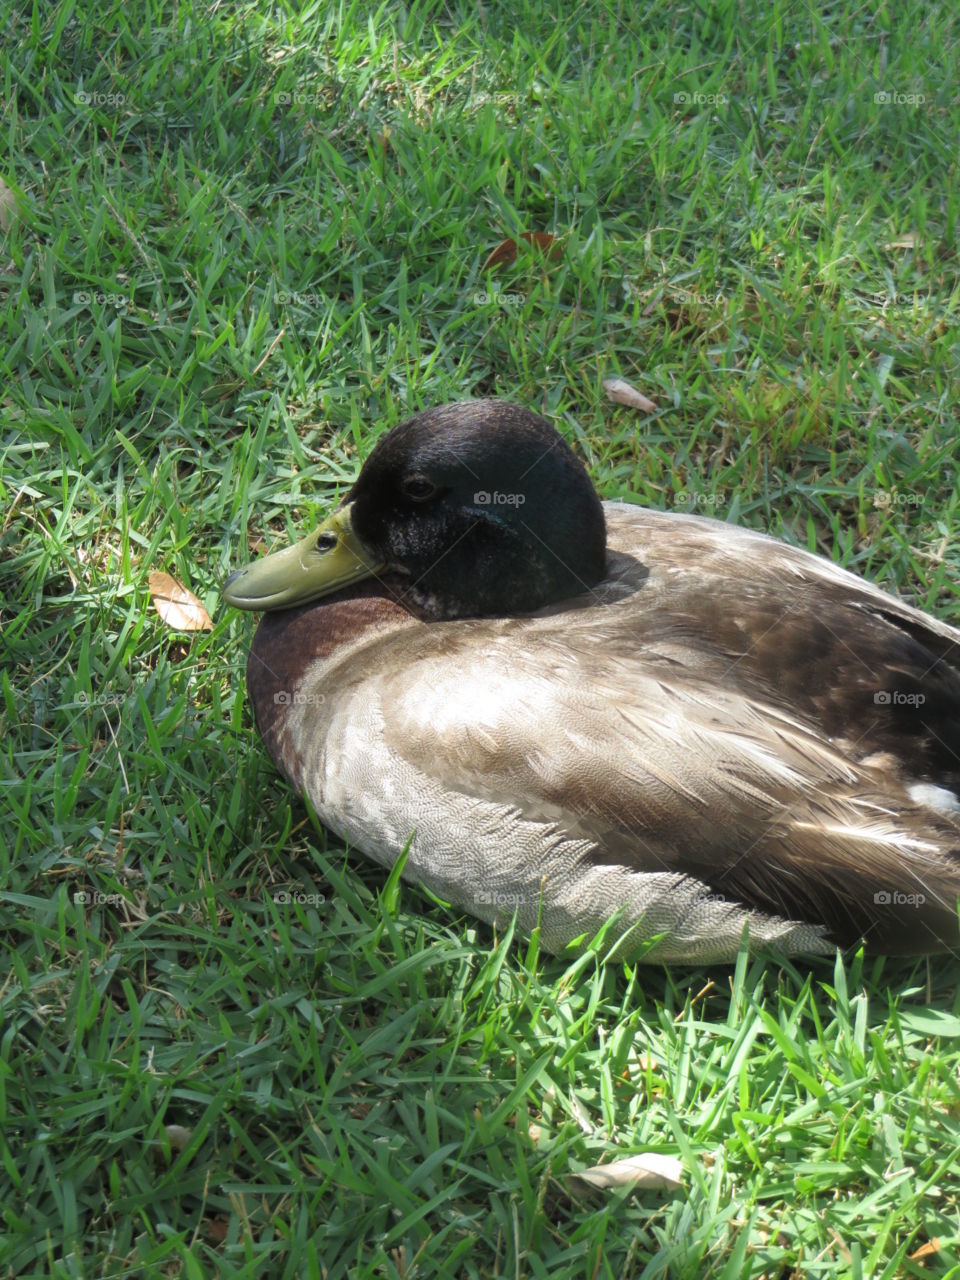 Lazy duck